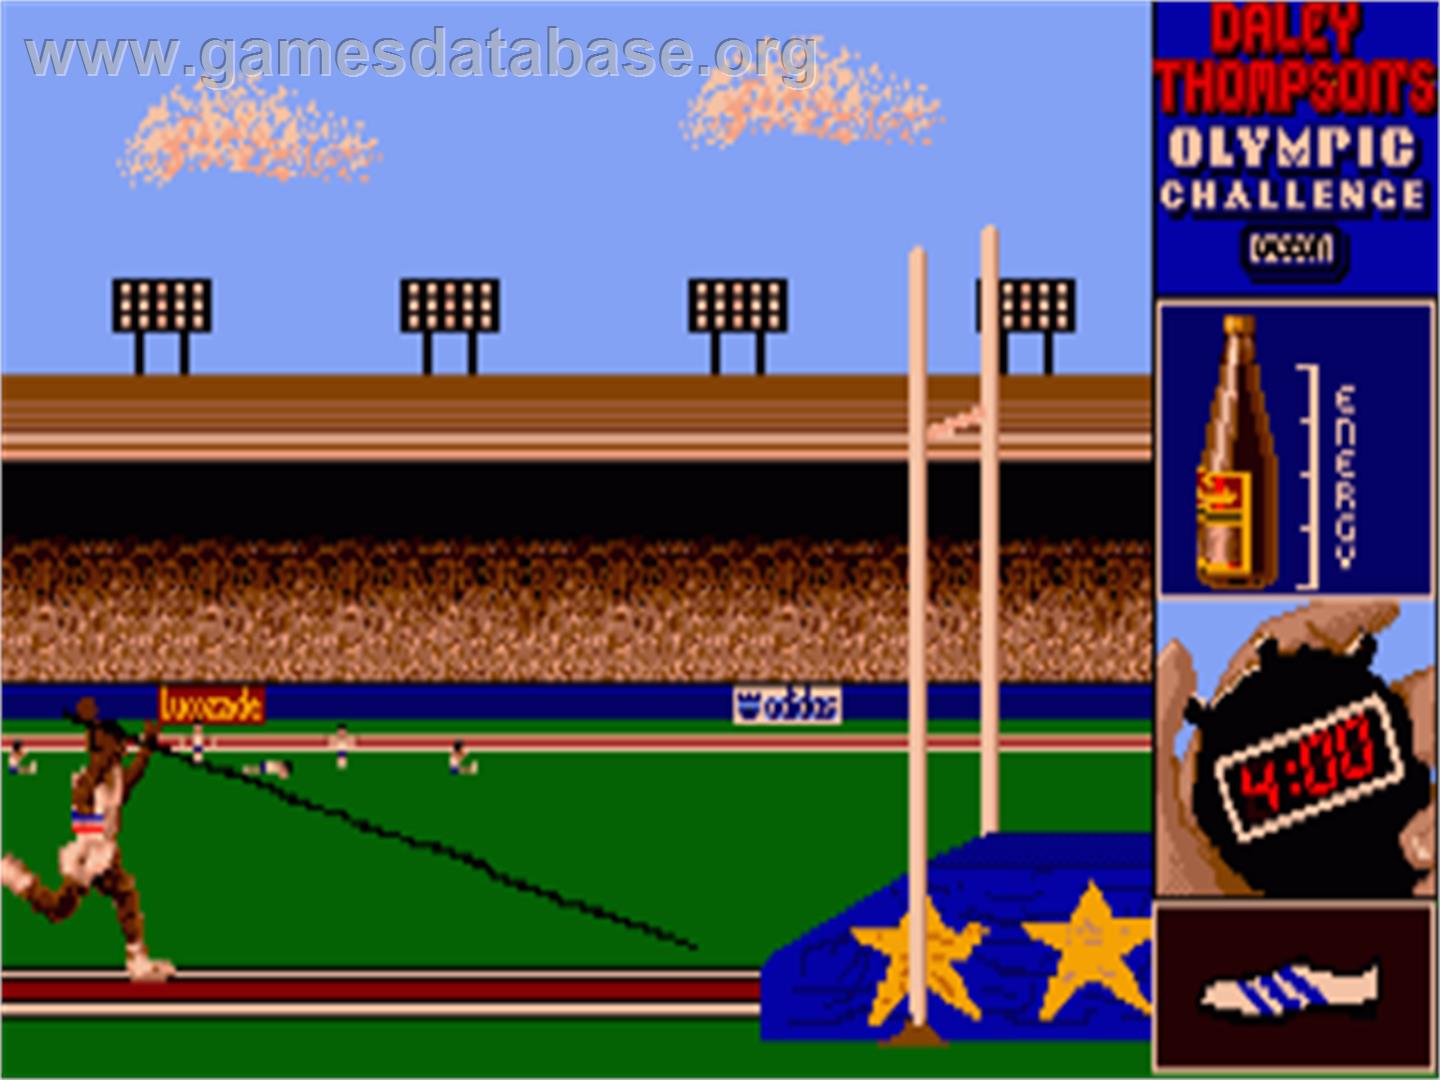 Daley Thompson's Olympic Challenge - Commodore Amiga - Artwork - In Game